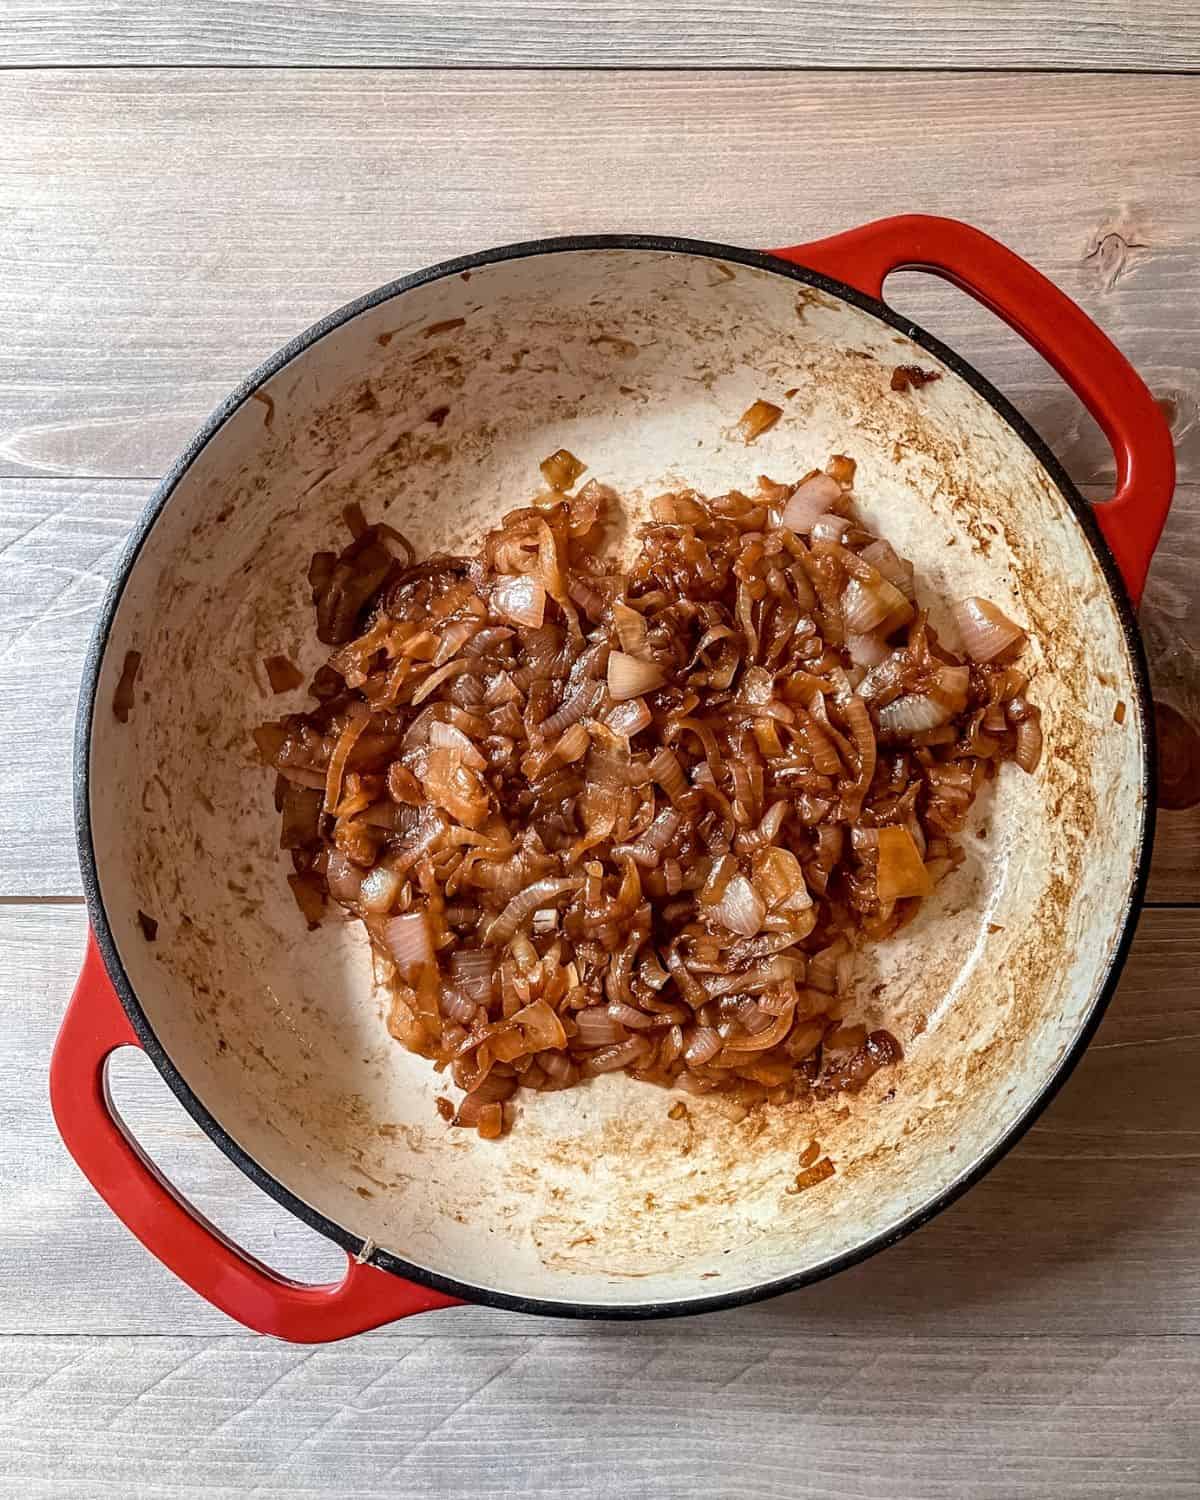 Caramelized onions in a red skillet.